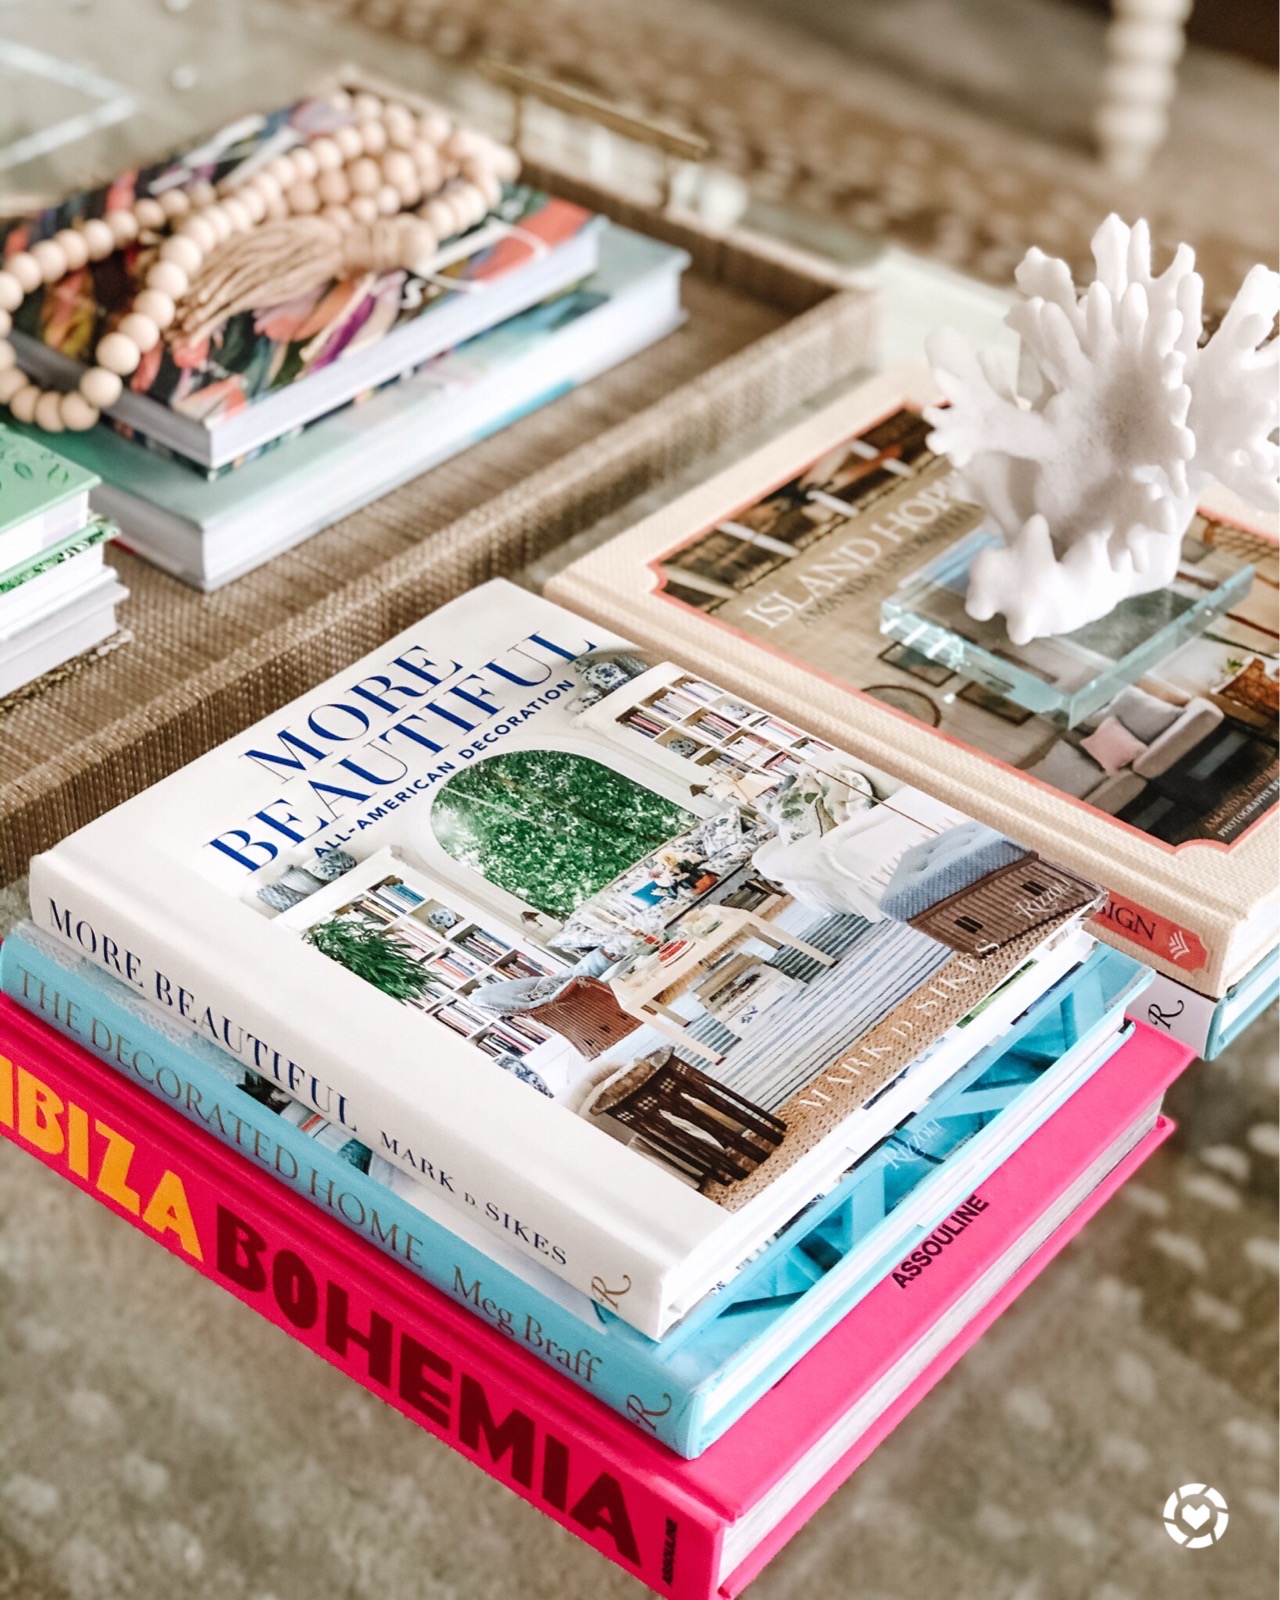 For some home decorators, books are as much about style as content